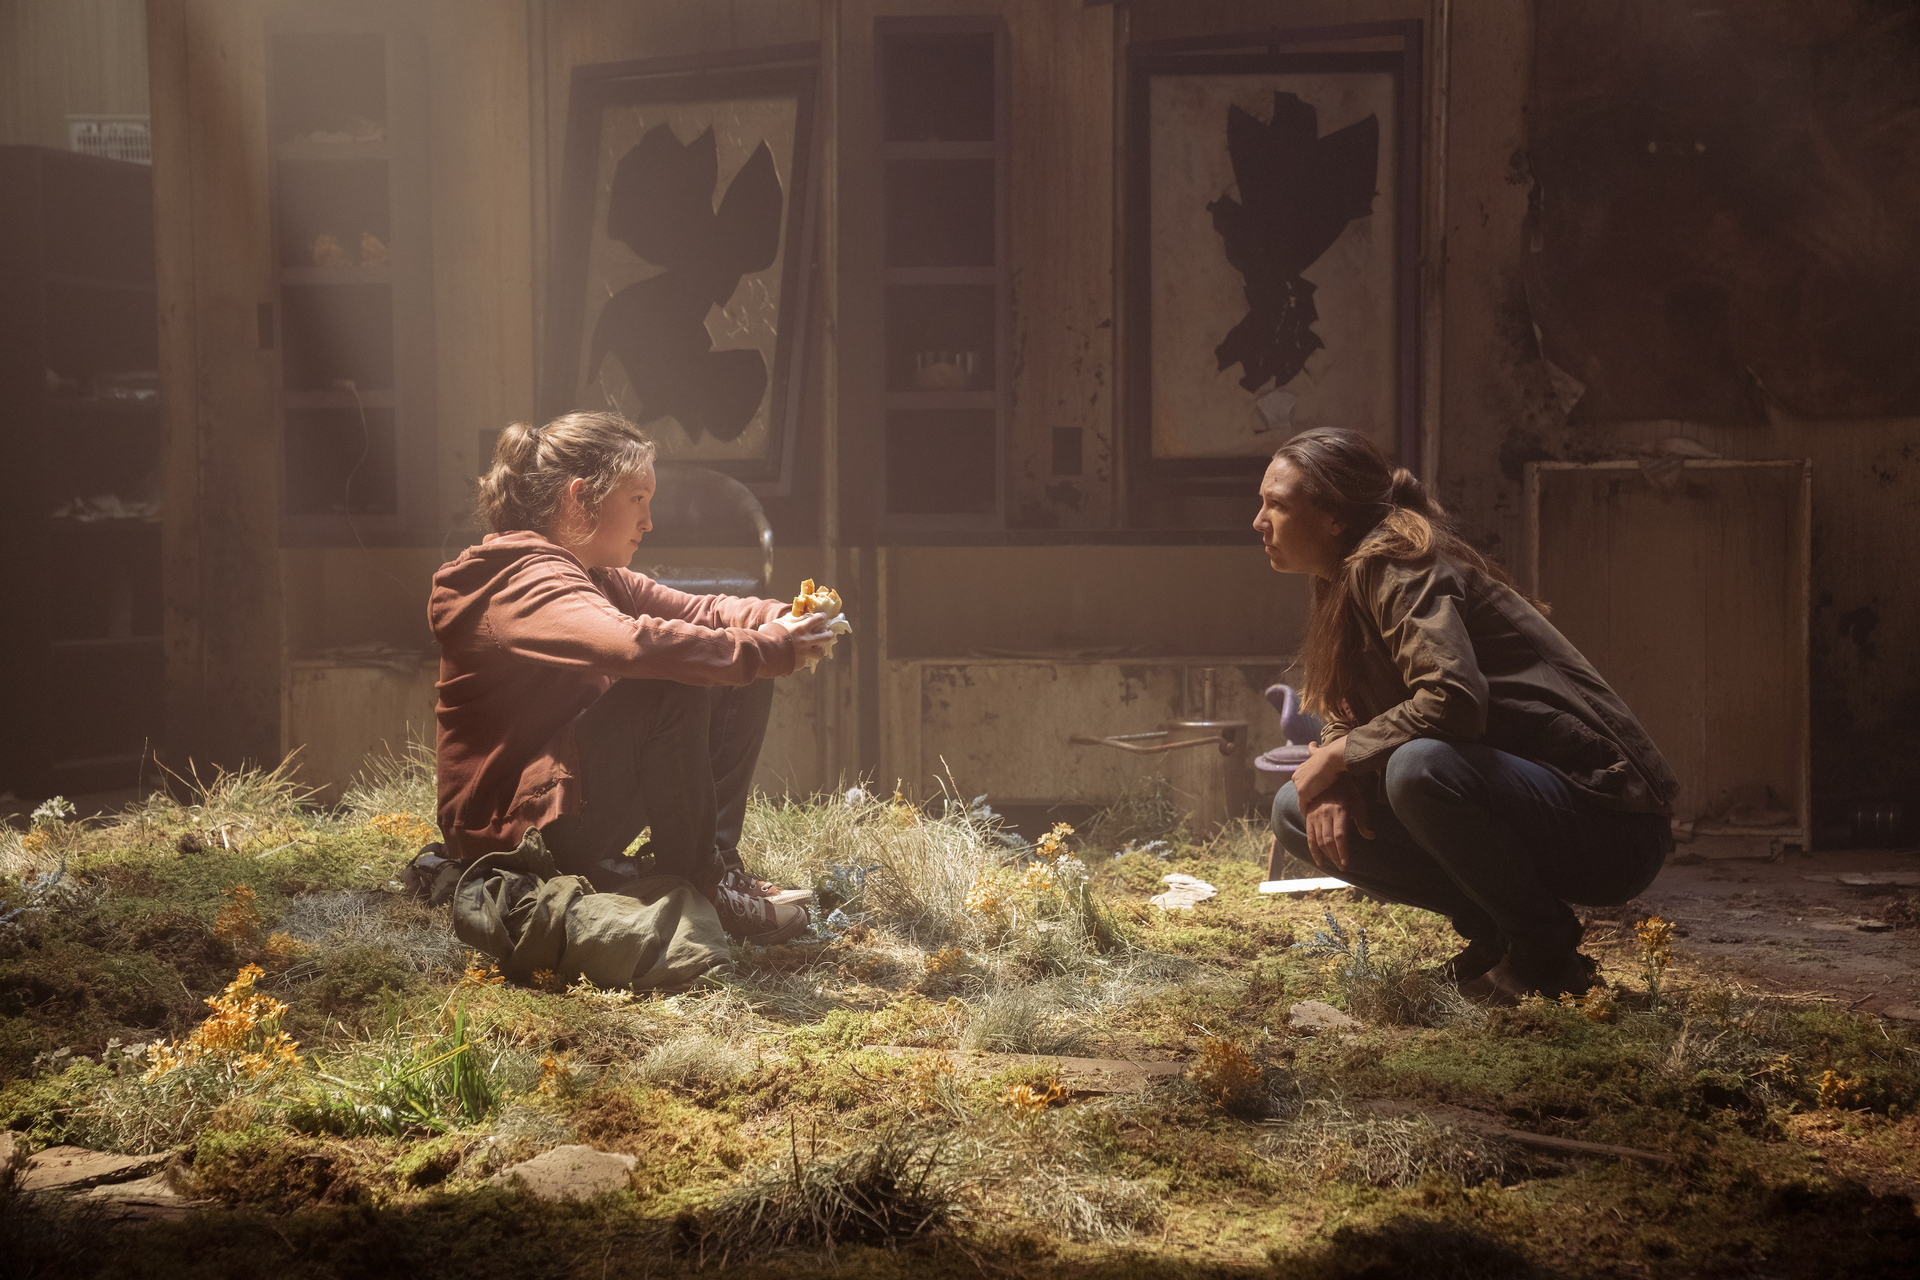 Ellie and Tess crouch facing each other in the grass that has overtaken a decrepit building as light shines in from above in the HBO series The Last of Us.